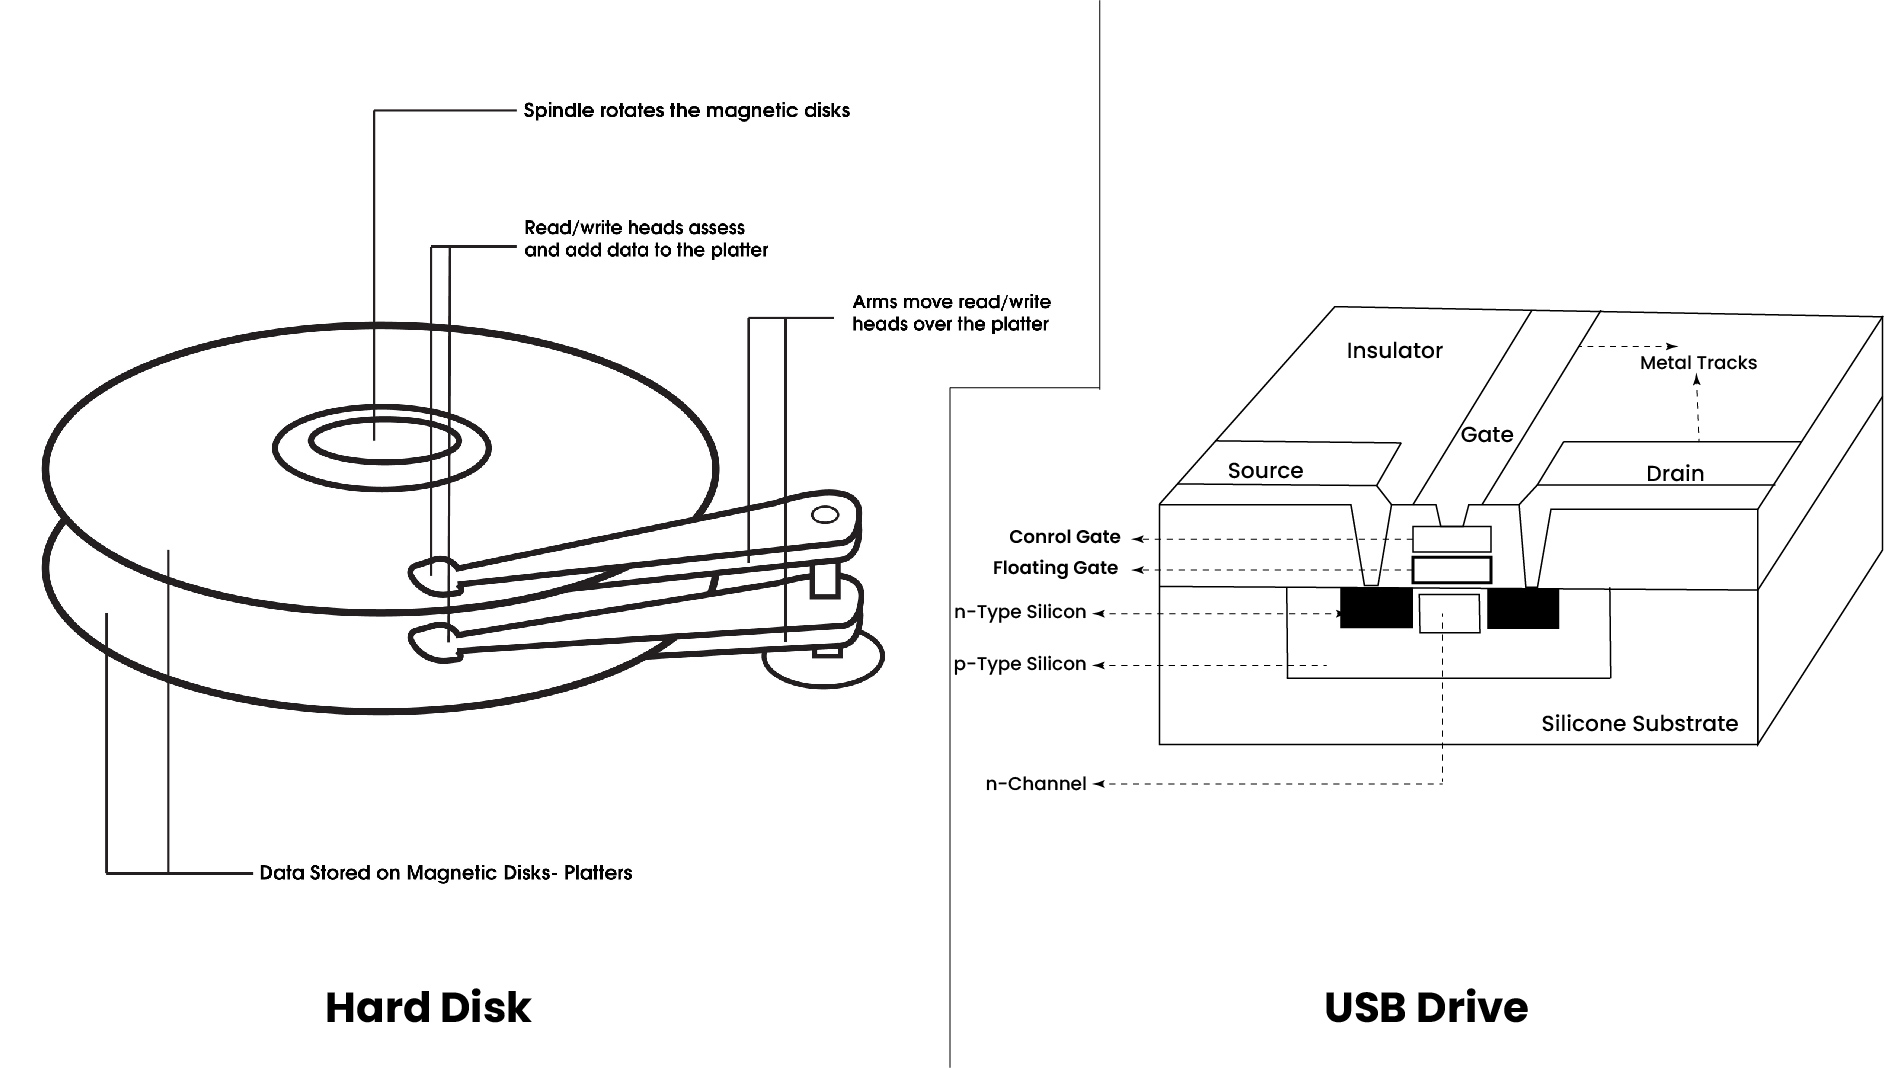 Difference between USB and Hard Disk